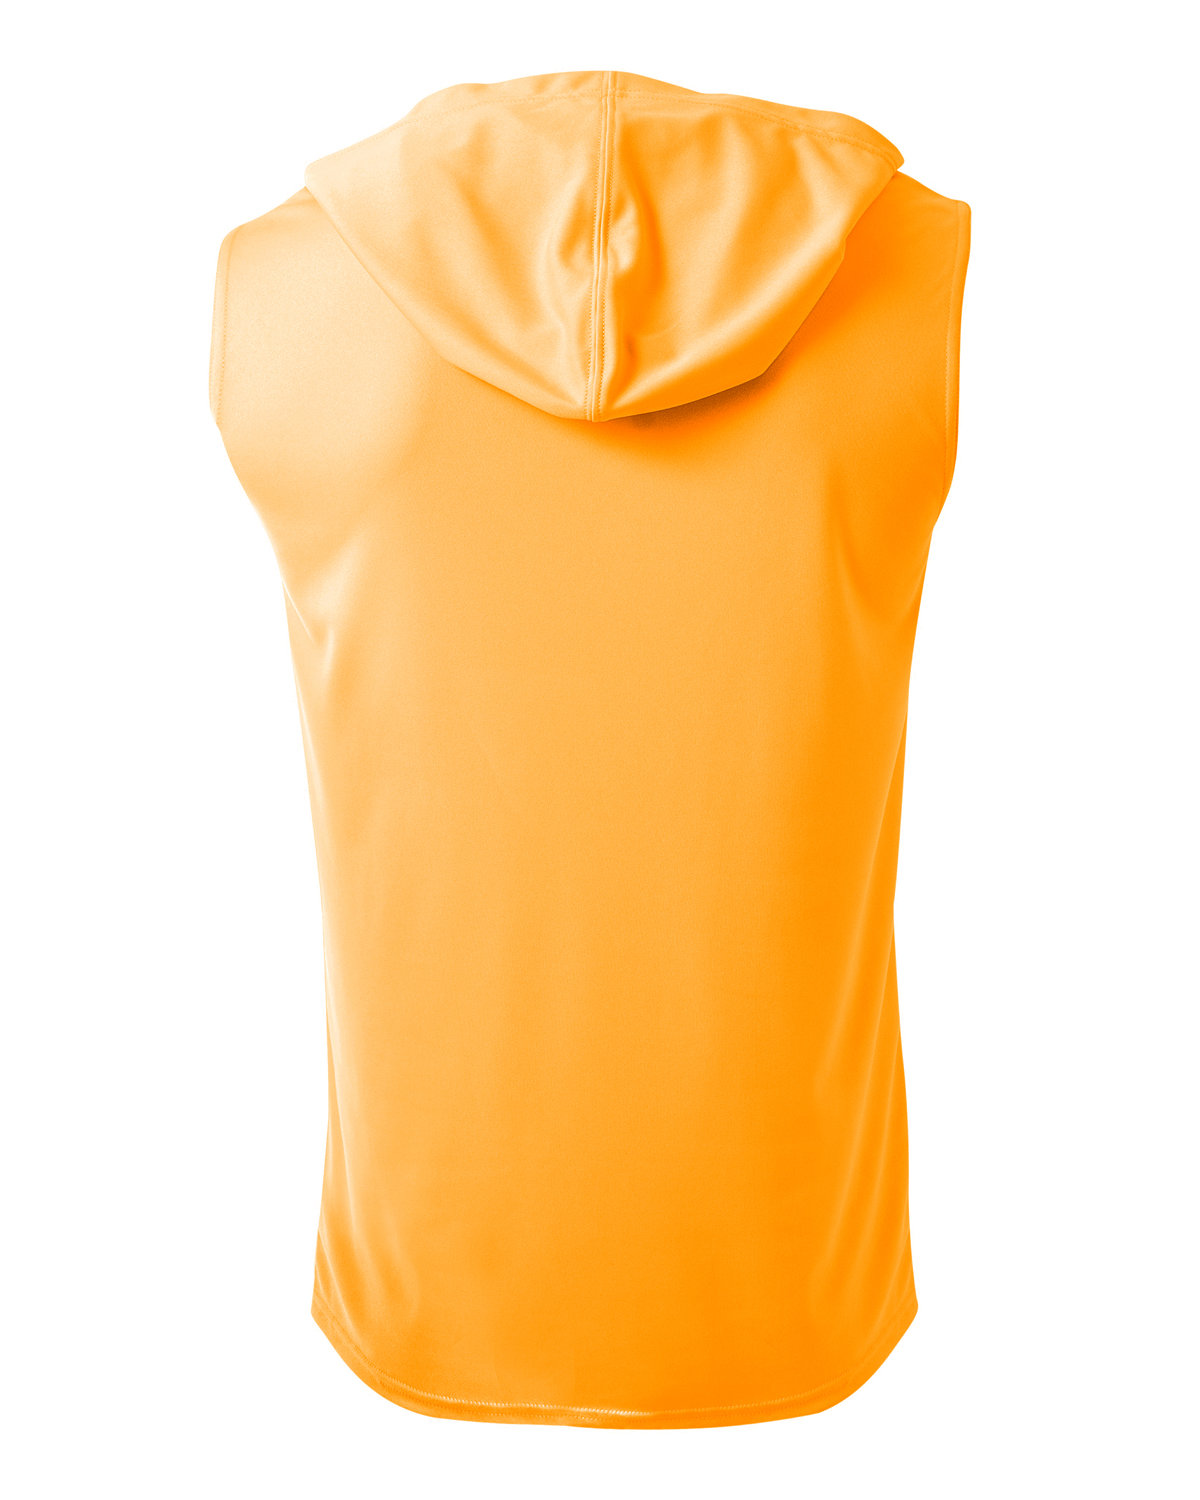 A4 Youth Sleeveless Hooded T-Shirt | alphabroder